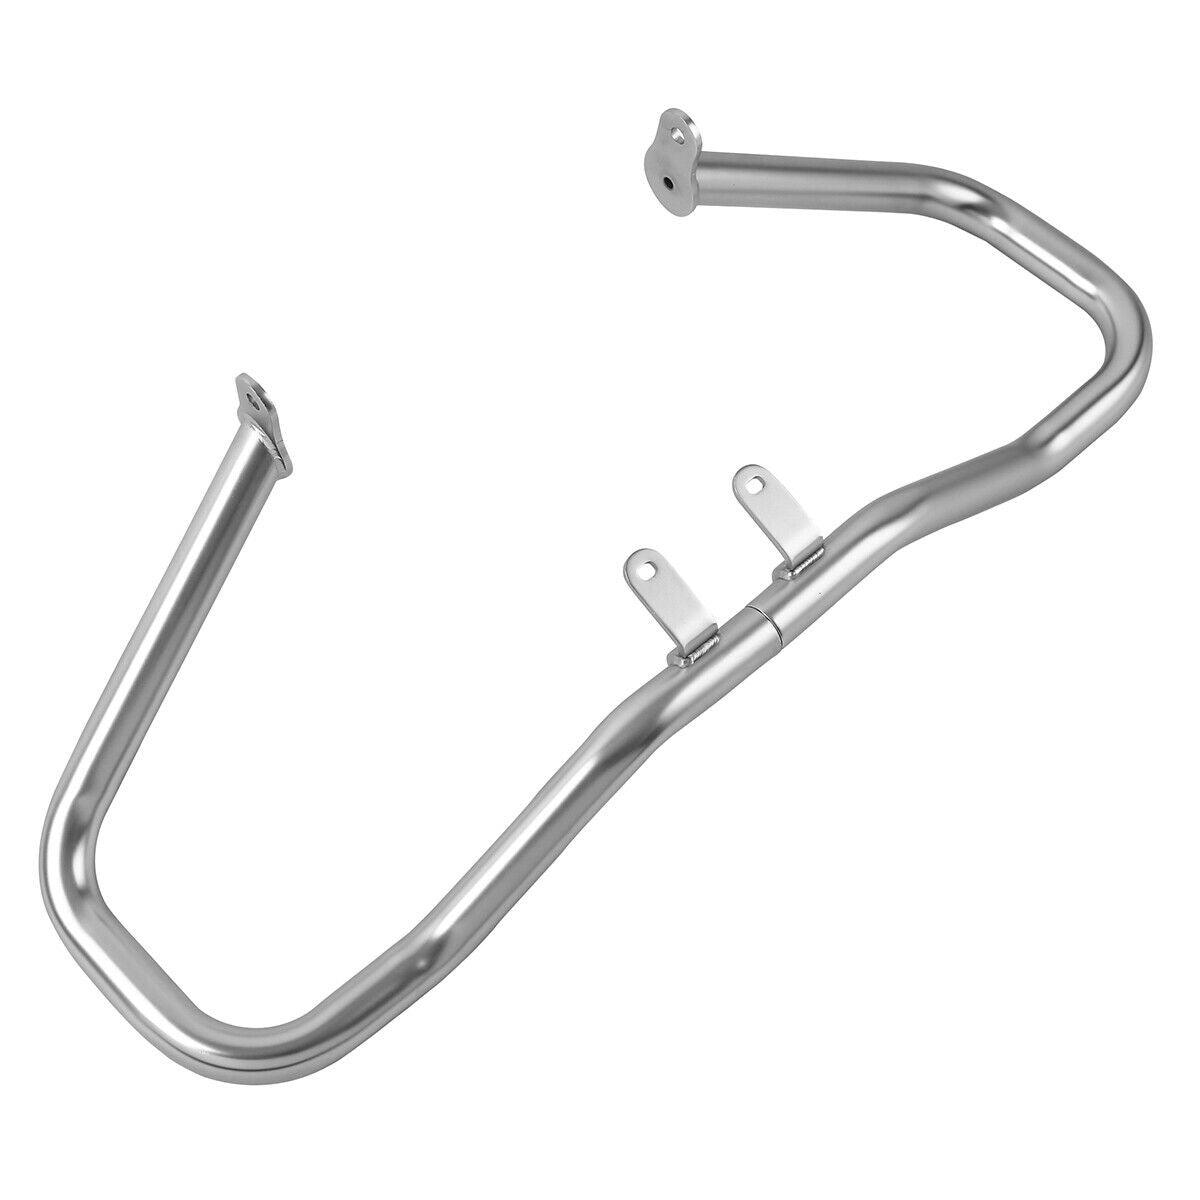 Chopped Engine Guard Highway Crash Bar Fit For Harley Touring FLHX FLHR 14-21 US - Moto Life Products